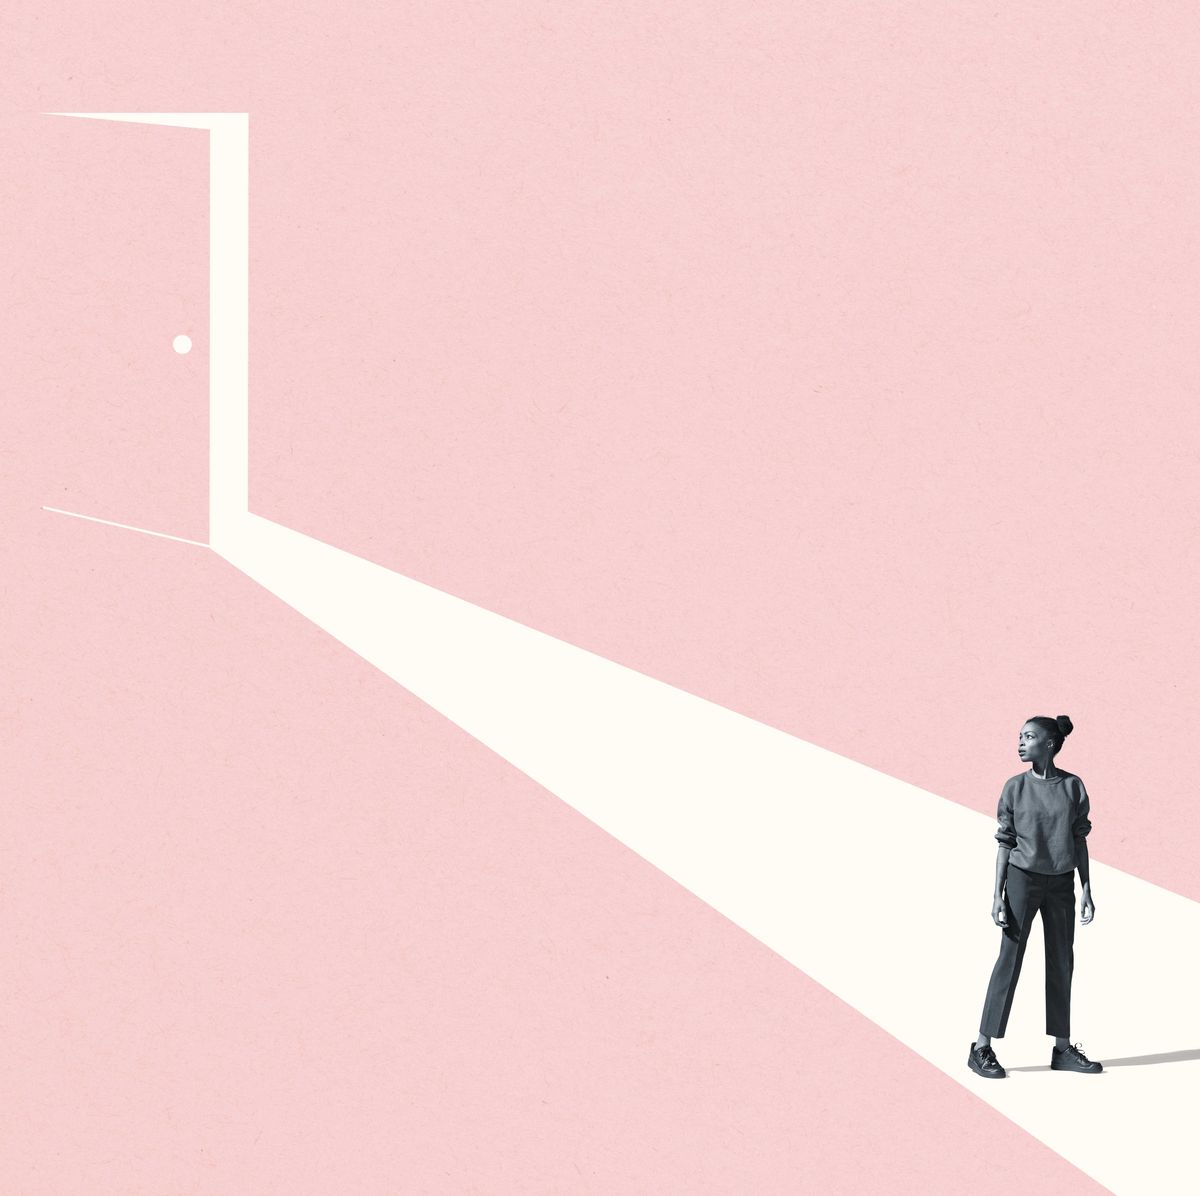 full length of young woman looking away while standing on white walkway or ray of light against pink door